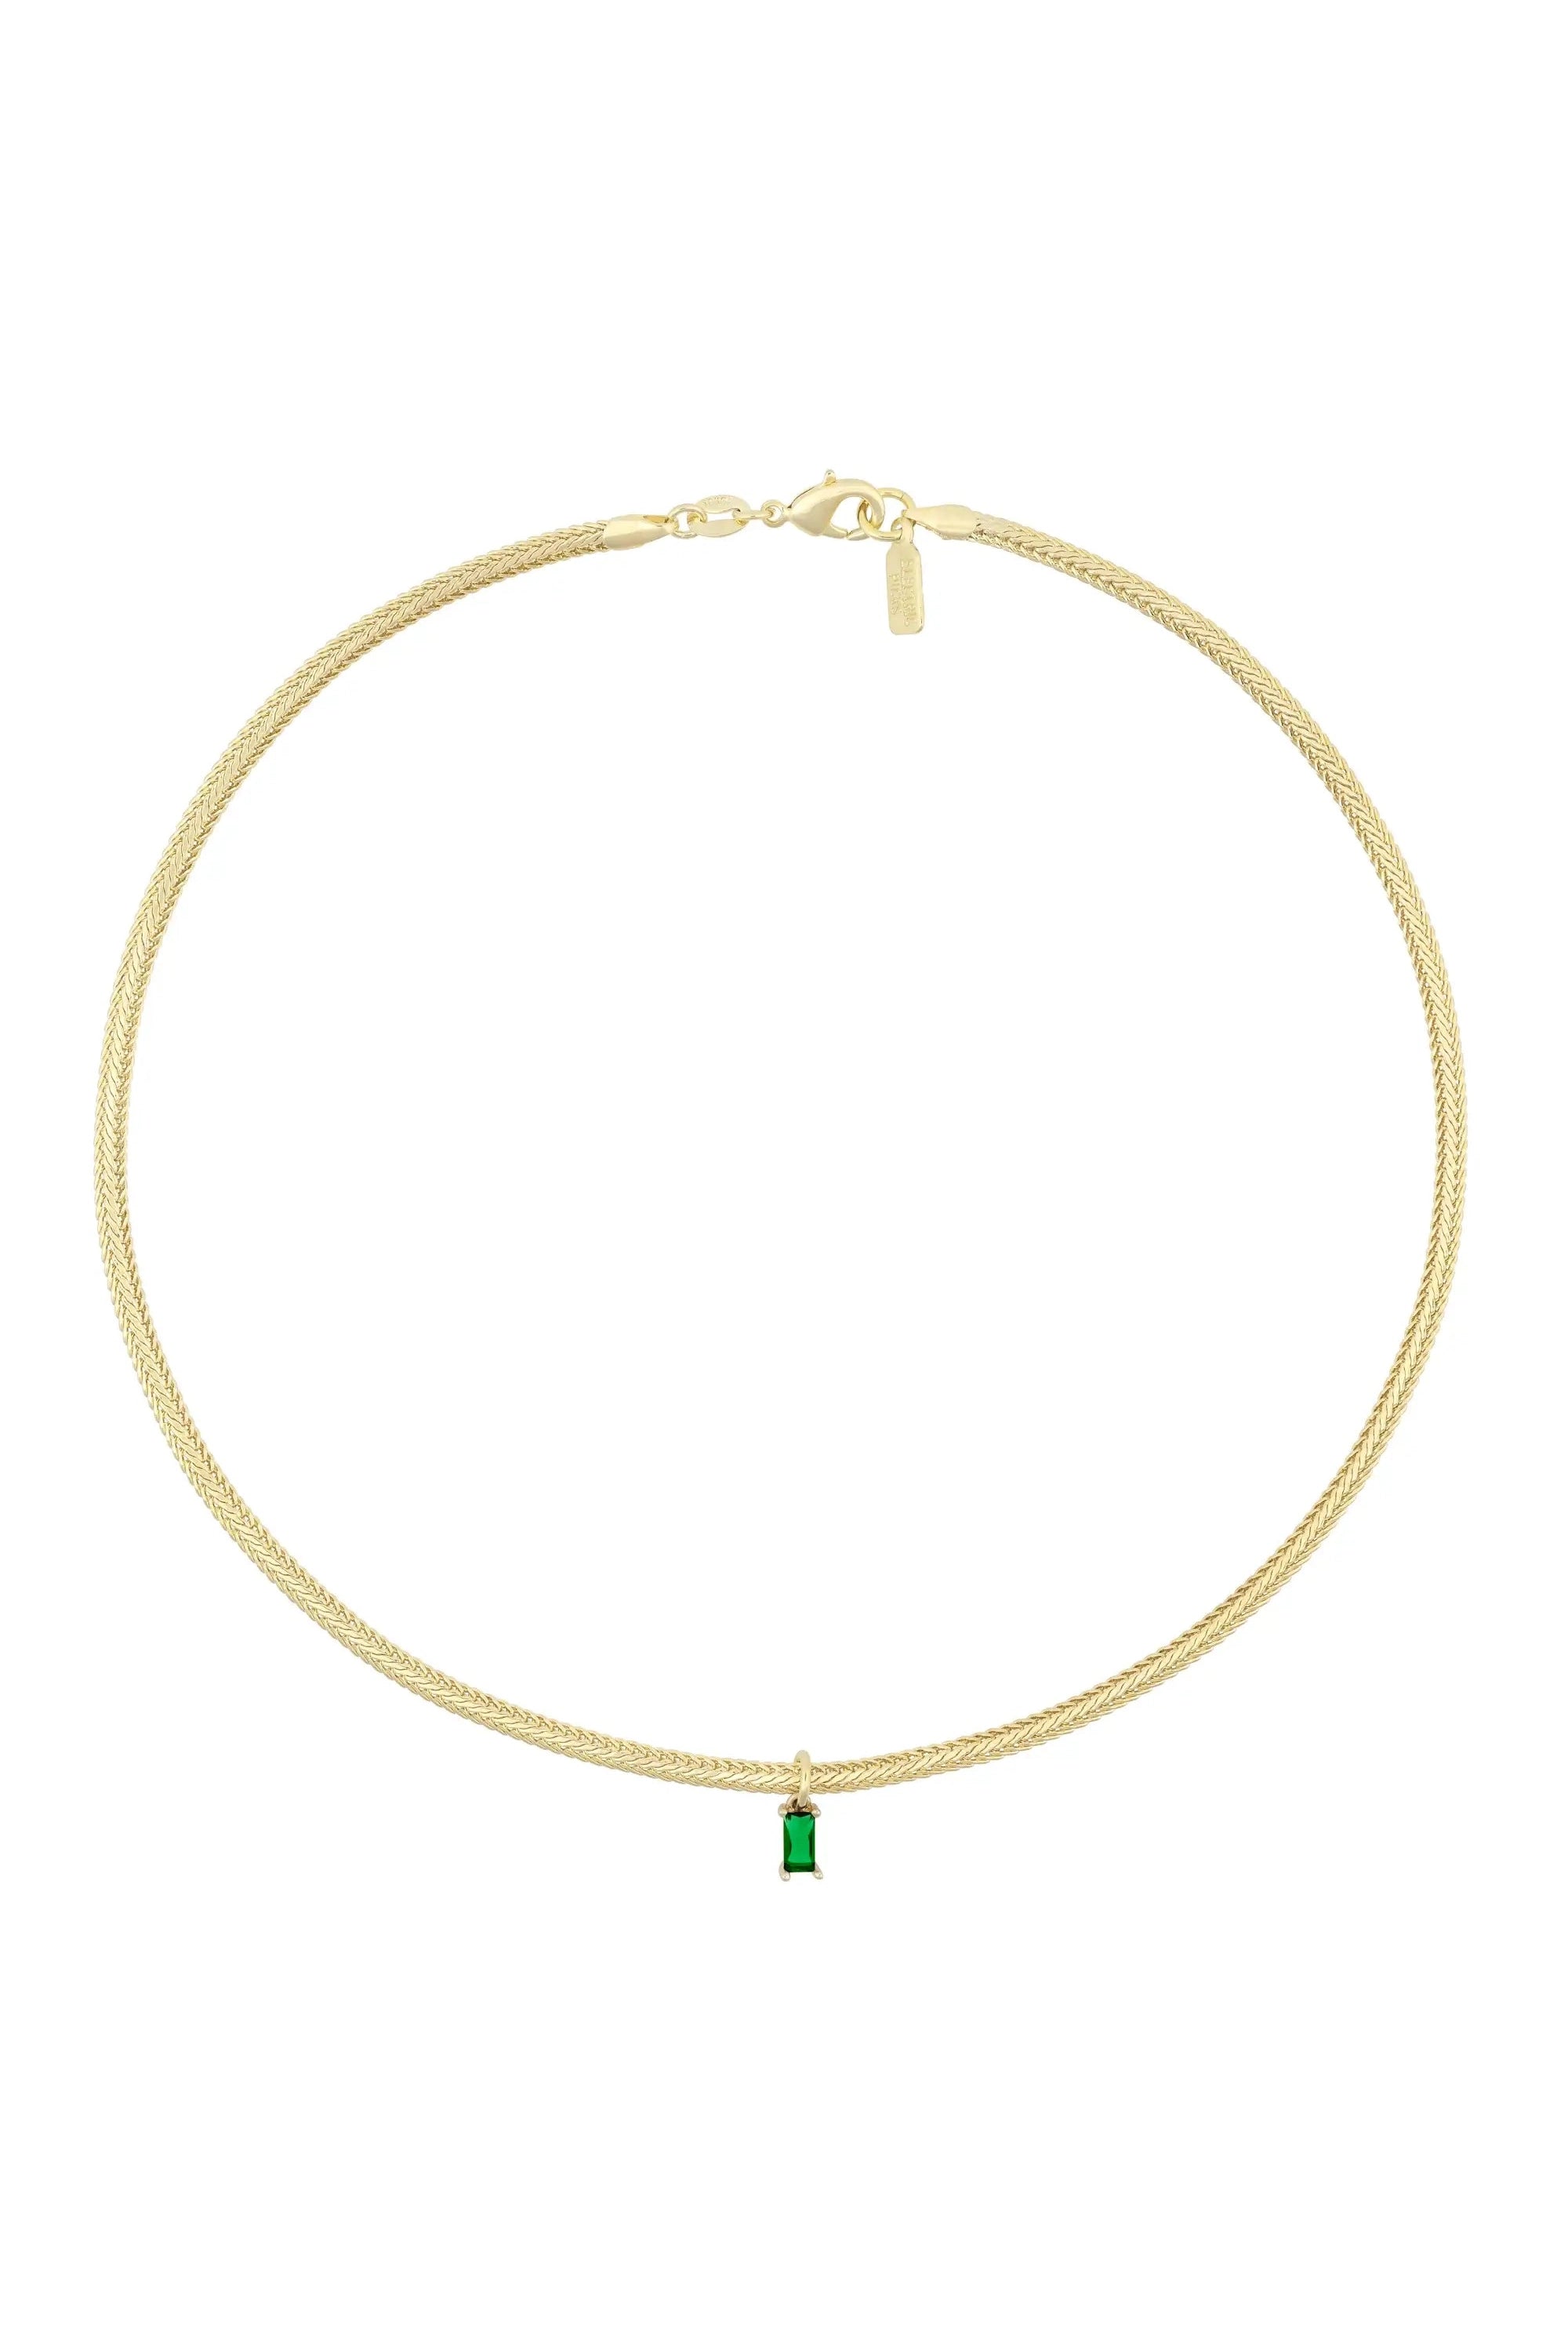 ELECTRIC PICKS PAIGE NECKLACE IN EMERALD